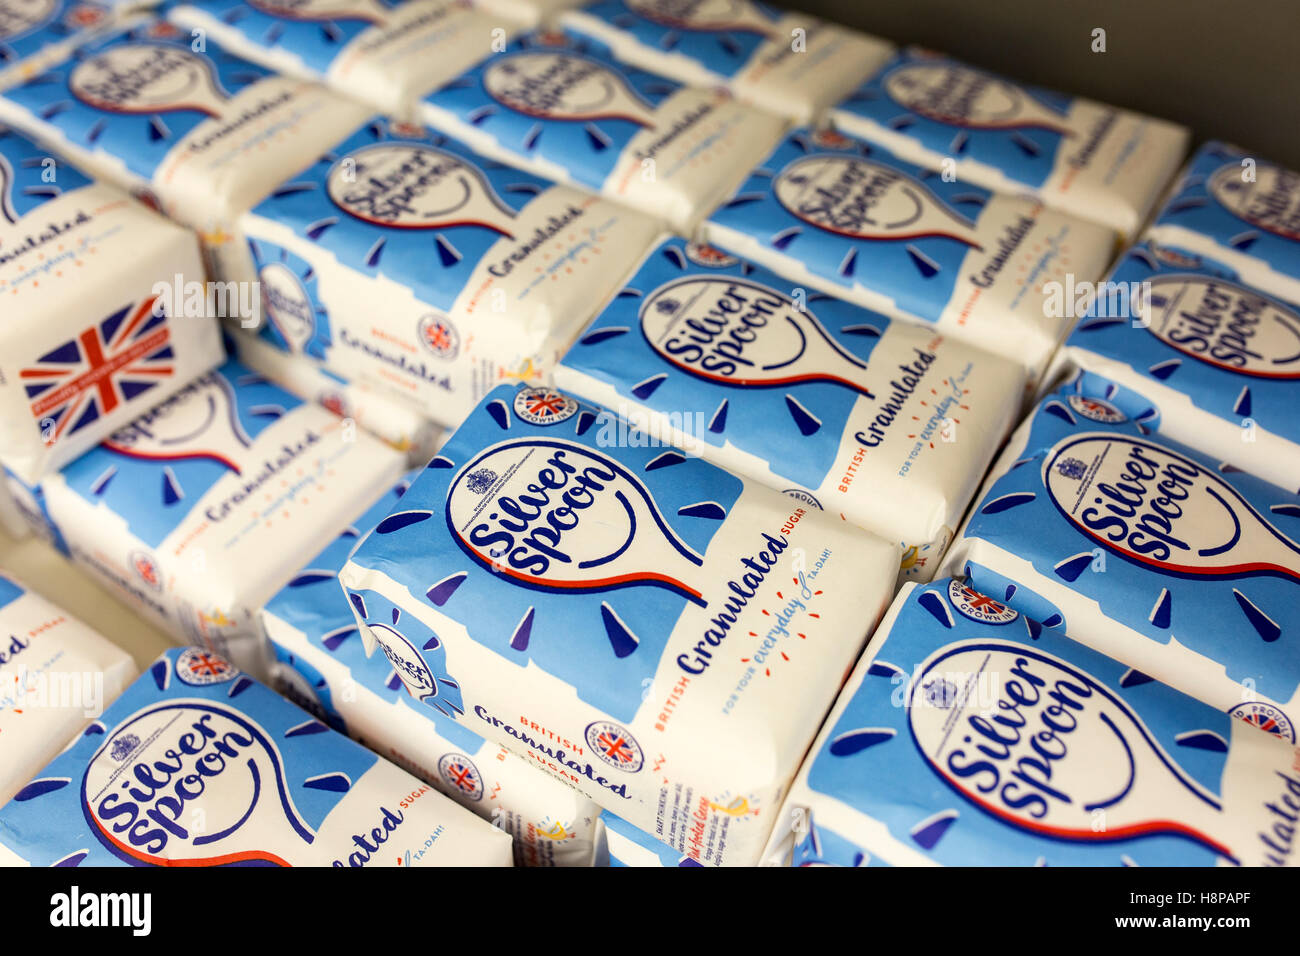 bags of Silver Spoon sugar inside a British supermarket store Stock Photo